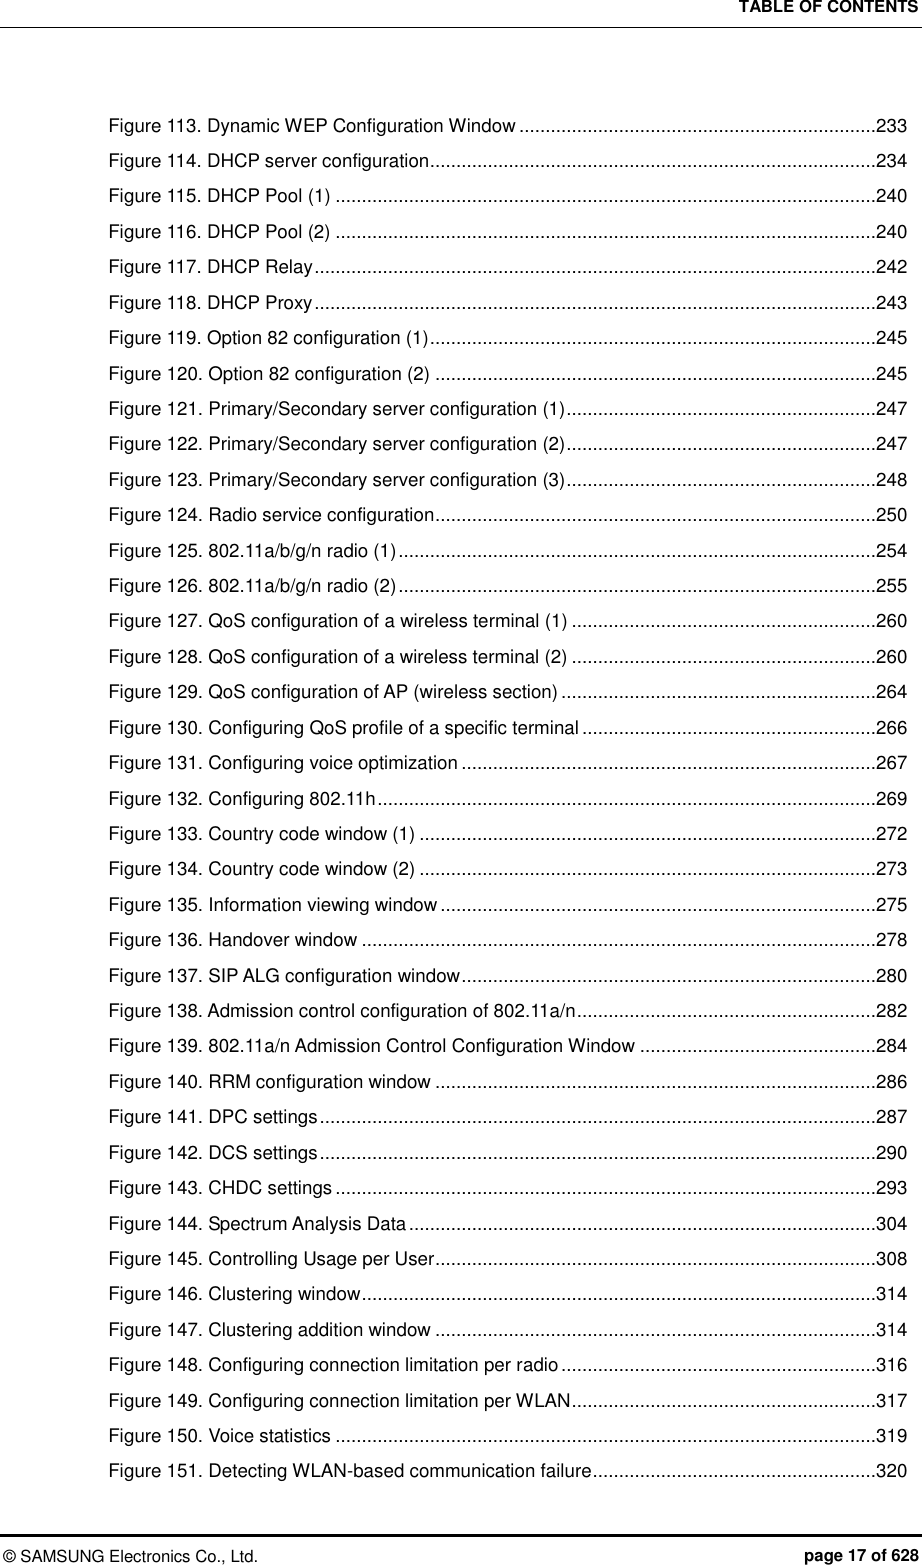 TABLE OF CONTENTS ©  SAMSUNG Electronics Co., Ltd.  page 17 of 628 Figure 113. Dynamic WEP Configuration Window ....................................................................233 Figure 114. DHCP server configuration .....................................................................................234 Figure 115. DHCP Pool (1) .......................................................................................................240 Figure 116. DHCP Pool (2) .......................................................................................................240 Figure 117. DHCP Relay ...........................................................................................................242 Figure 118. DHCP Proxy ...........................................................................................................243 Figure 119. Option 82 configuration (1) .....................................................................................245 Figure 120. Option 82 configuration (2) ....................................................................................245 Figure 121. Primary/Secondary server configuration (1) ...........................................................247 Figure 122. Primary/Secondary server configuration (2) ...........................................................247 Figure 123. Primary/Secondary server configuration (3) ...........................................................248 Figure 124. Radio service configuration ....................................................................................250 Figure 125. 802.11a/b/g/n radio (1) ...........................................................................................254 Figure 126. 802.11a/b/g/n radio (2) ...........................................................................................255 Figure 127. QoS configuration of a wireless terminal (1) ..........................................................260 Figure 128. QoS configuration of a wireless terminal (2) ..........................................................260 Figure 129. QoS configuration of AP (wireless section) ............................................................264 Figure 130. Configuring QoS profile of a specific terminal ........................................................266 Figure 131. Configuring voice optimization ...............................................................................267 Figure 132. Configuring 802.11h ...............................................................................................269 Figure 133. Country code window (1) .......................................................................................272 Figure 134. Country code window (2) .......................................................................................273 Figure 135. Information viewing window ...................................................................................275 Figure 136. Handover window ..................................................................................................278 Figure 137. SIP ALG configuration window ...............................................................................280 Figure 138. Admission control configuration of 802.11a/n .........................................................282 Figure 139. 802.11a/n Admission Control Configuration Window .............................................284 Figure 140. RRM configuration window ....................................................................................286 Figure 141. DPC settings ..........................................................................................................287 Figure 142. DCS settings ..........................................................................................................290 Figure 143. CHDC settings .......................................................................................................293 Figure 144. Spectrum Analysis Data .........................................................................................304 Figure 145. Controlling Usage per User ....................................................................................308 Figure 146. Clustering window ..................................................................................................314 Figure 147. Clustering addition window ....................................................................................314 Figure 148. Configuring connection limitation per radio ............................................................316 Figure 149. Configuring connection limitation per WLAN ..........................................................317 Figure 150. Voice statistics .......................................................................................................319 Figure 151. Detecting WLAN-based communication failure ......................................................320 